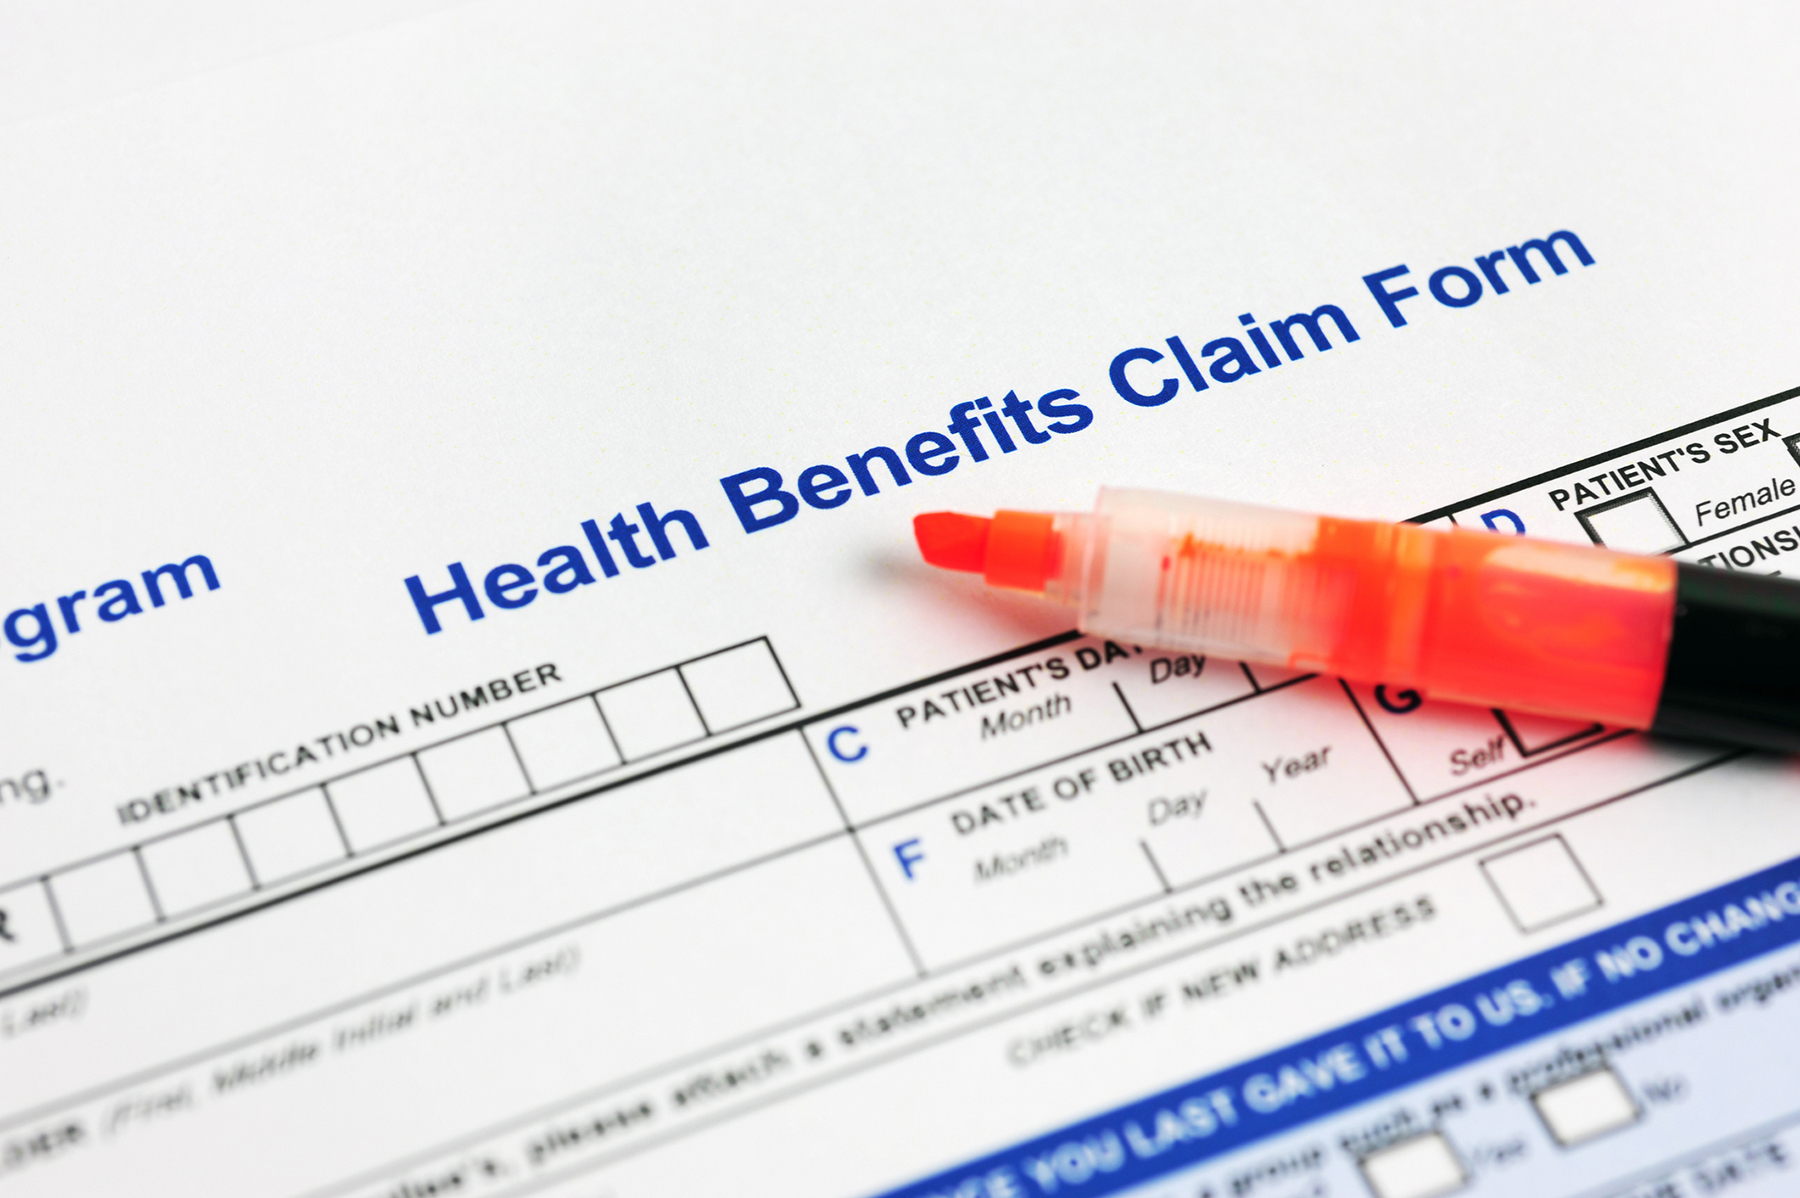 A health benefits claim form is partially filled out with a pen resting on top.